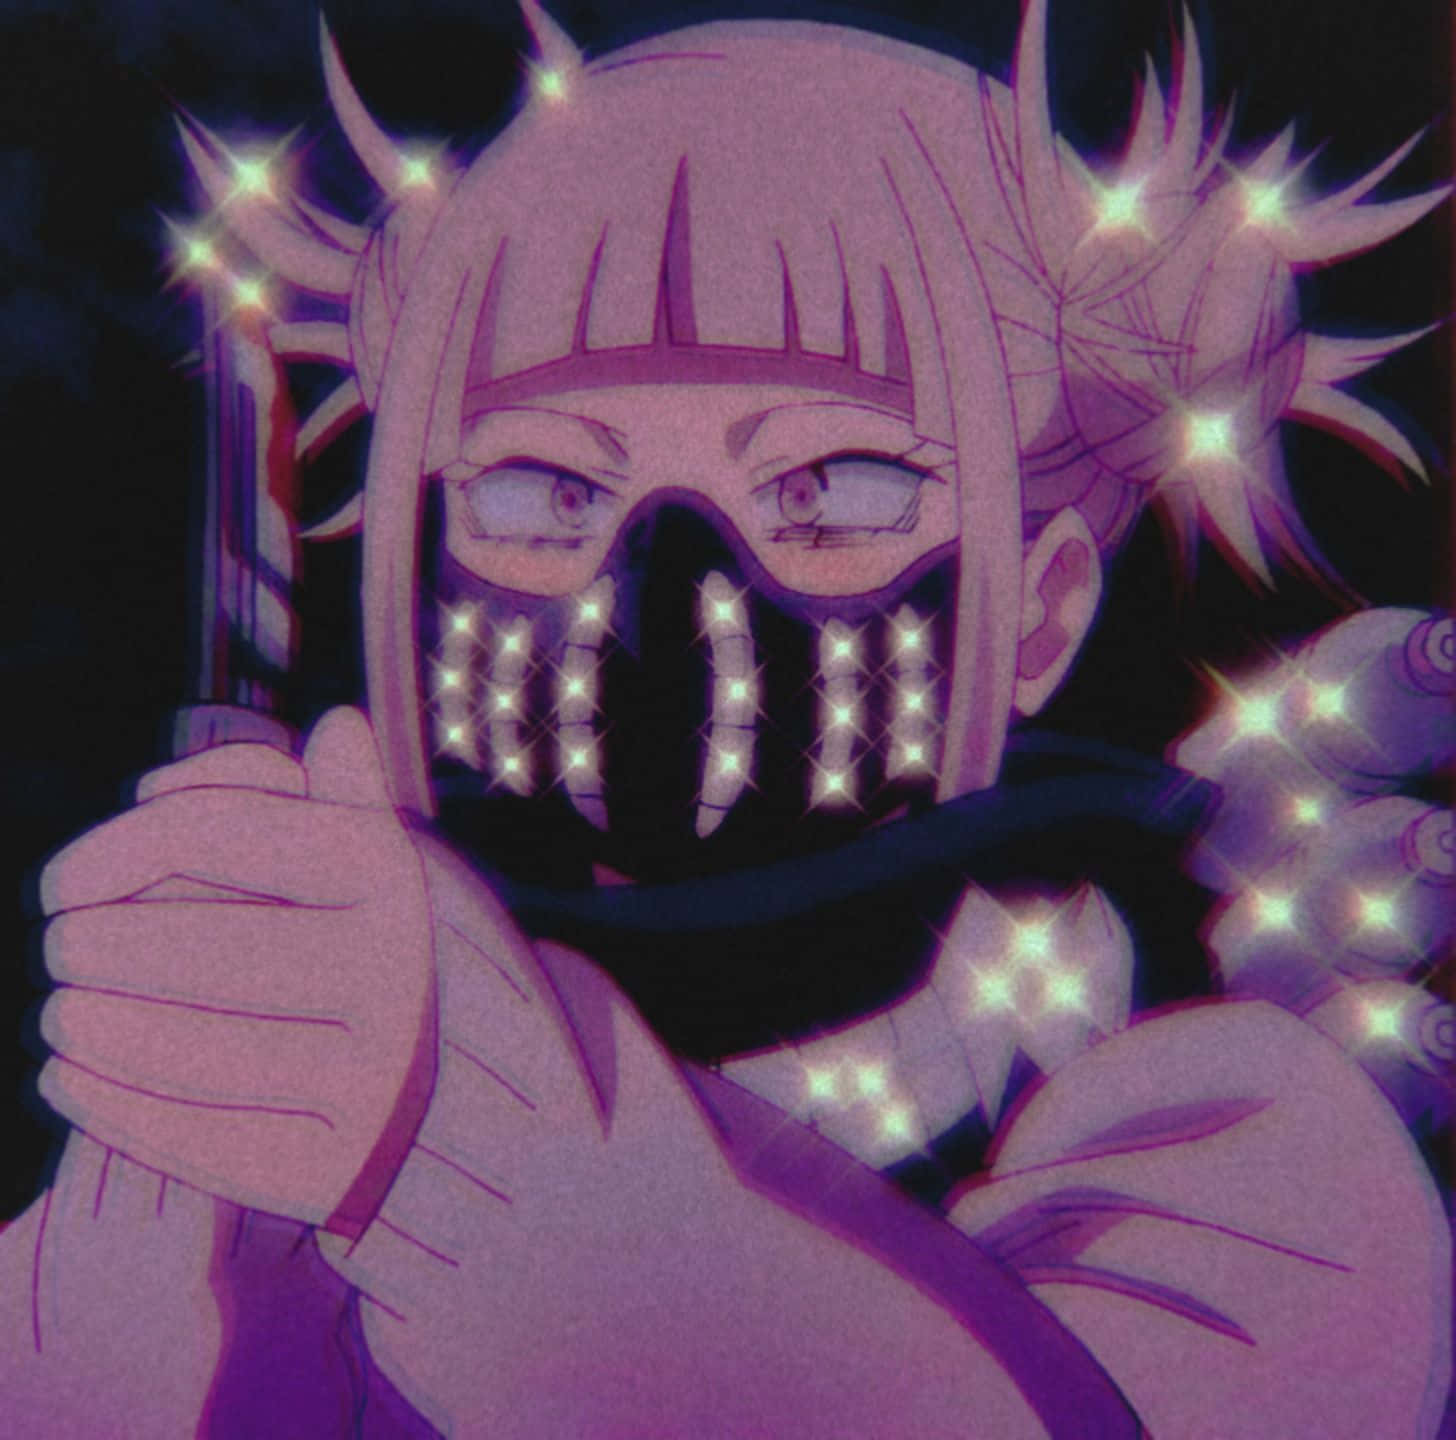 Live fast and live wild with Himiko Toga in tow! Wallpaper